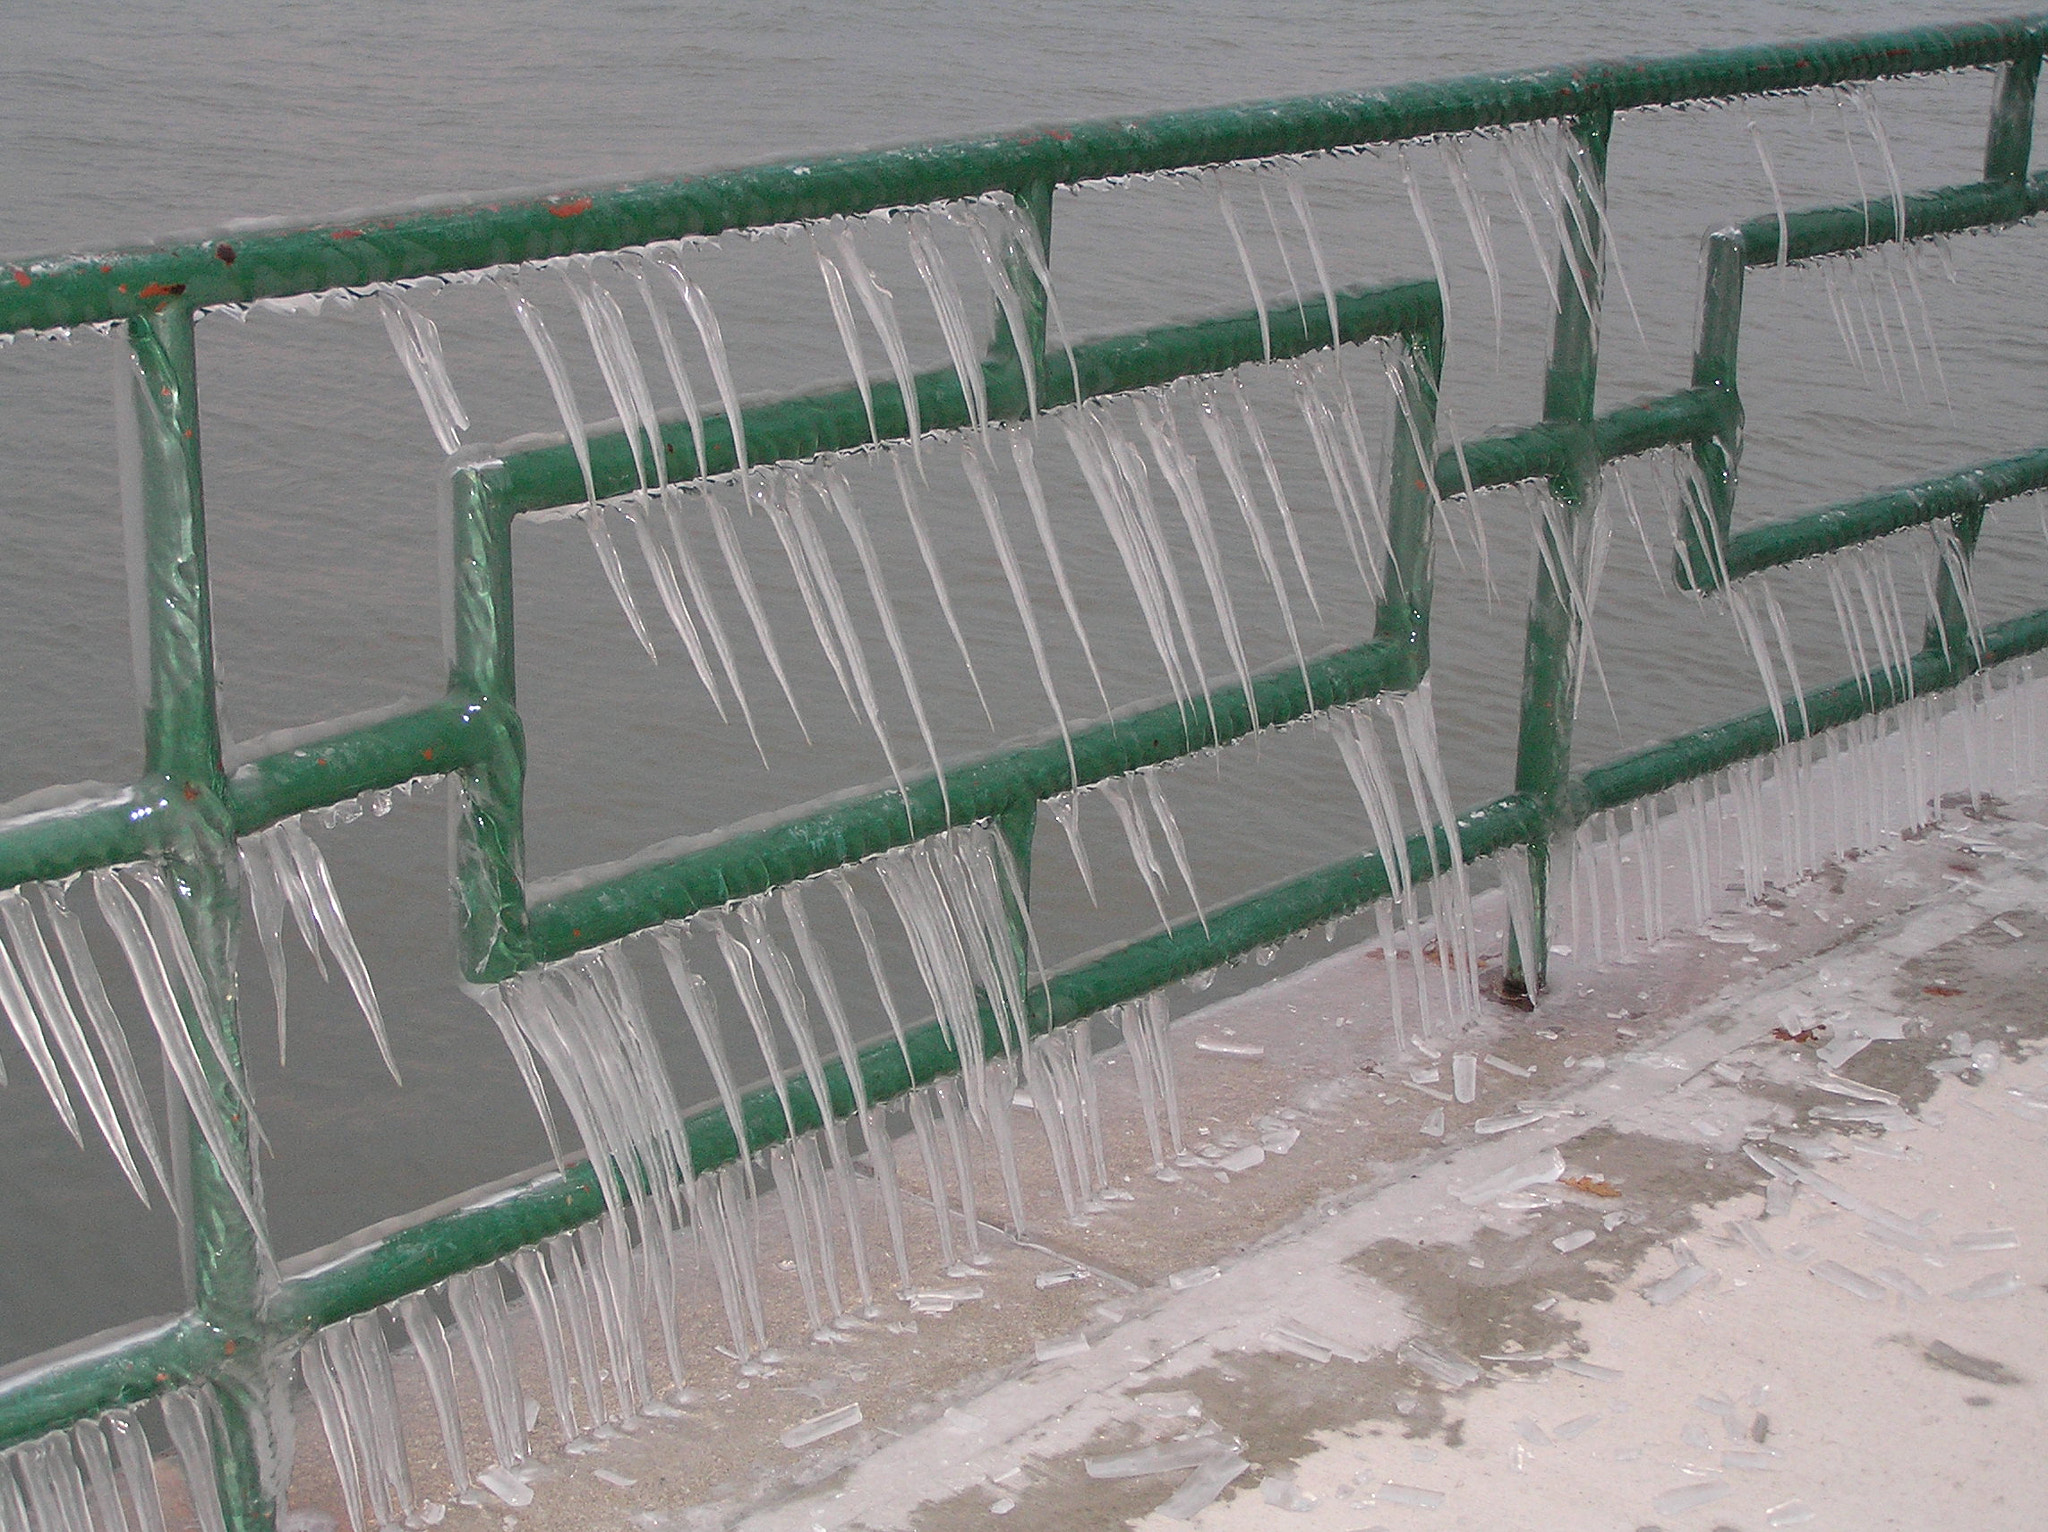 Olympus C770UZ sample photo. Ice from waves on fence at coventry gardens photography